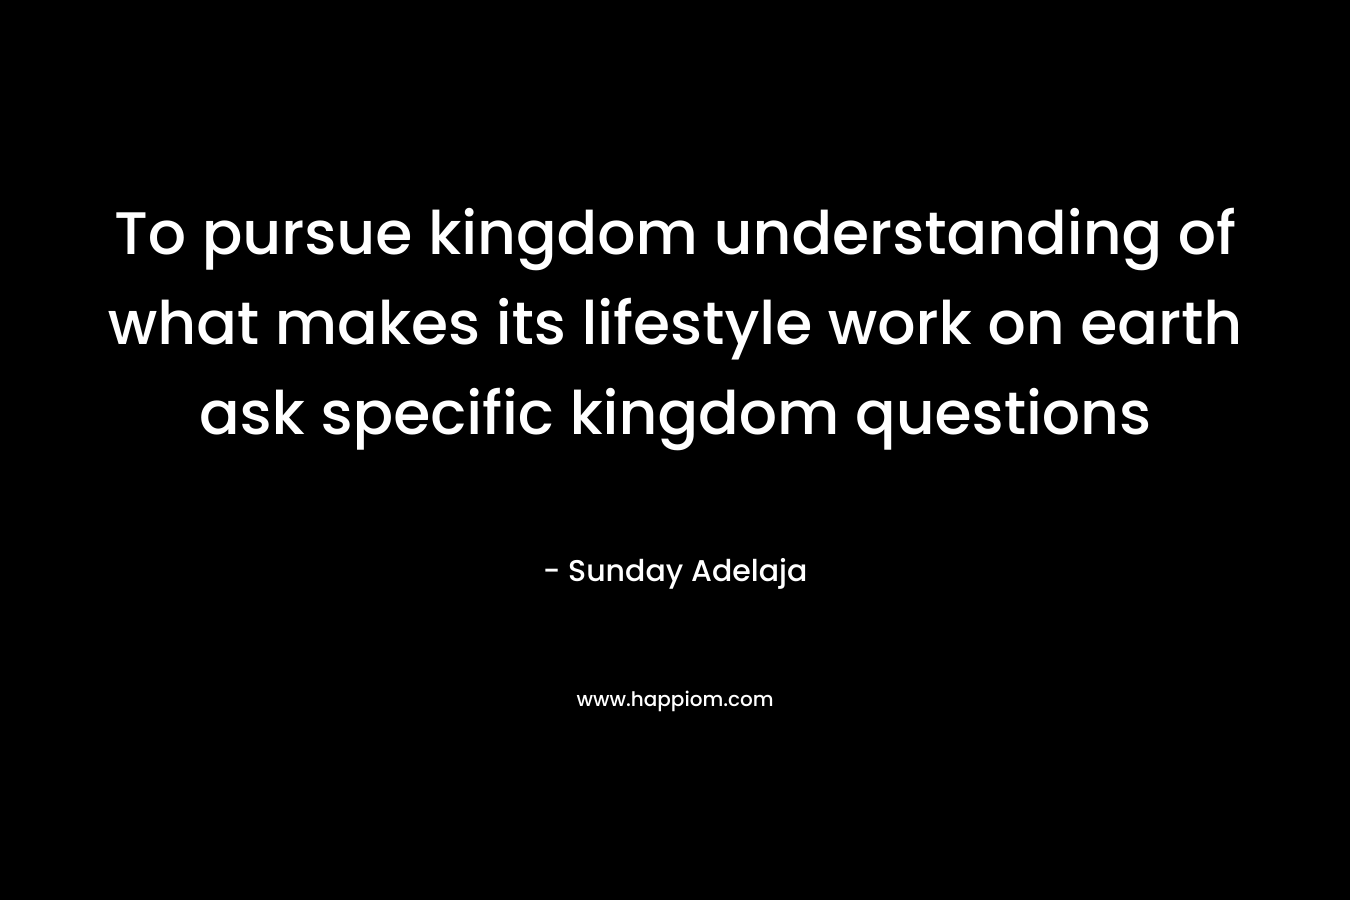 To pursue kingdom understanding of what makes its lifestyle work on earth ask specific kingdom questions